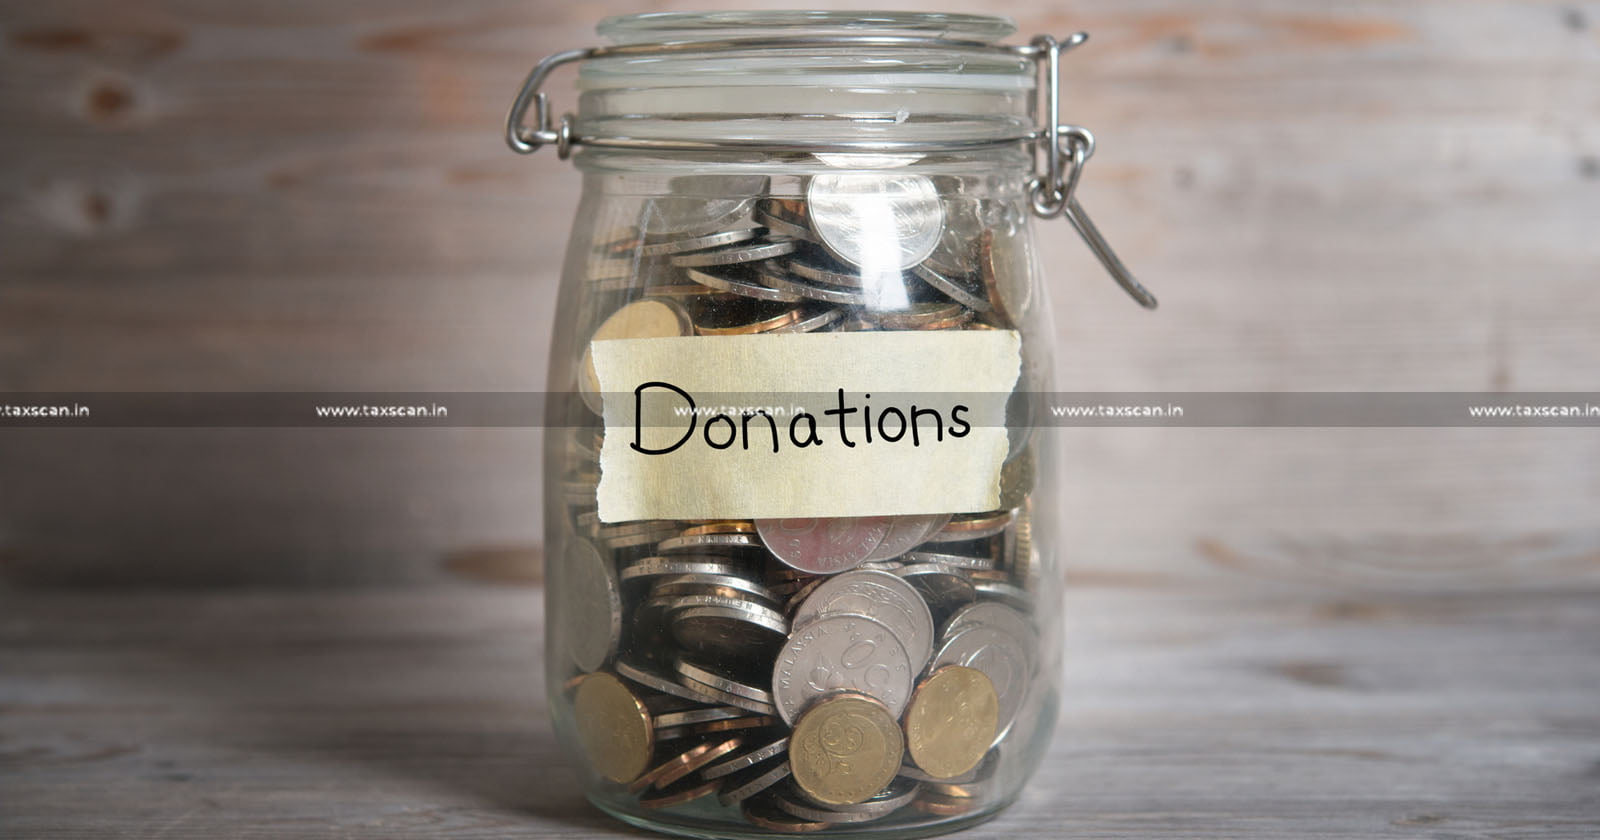 Case Digest Income Tax Deductions For Donations Under Section 80G